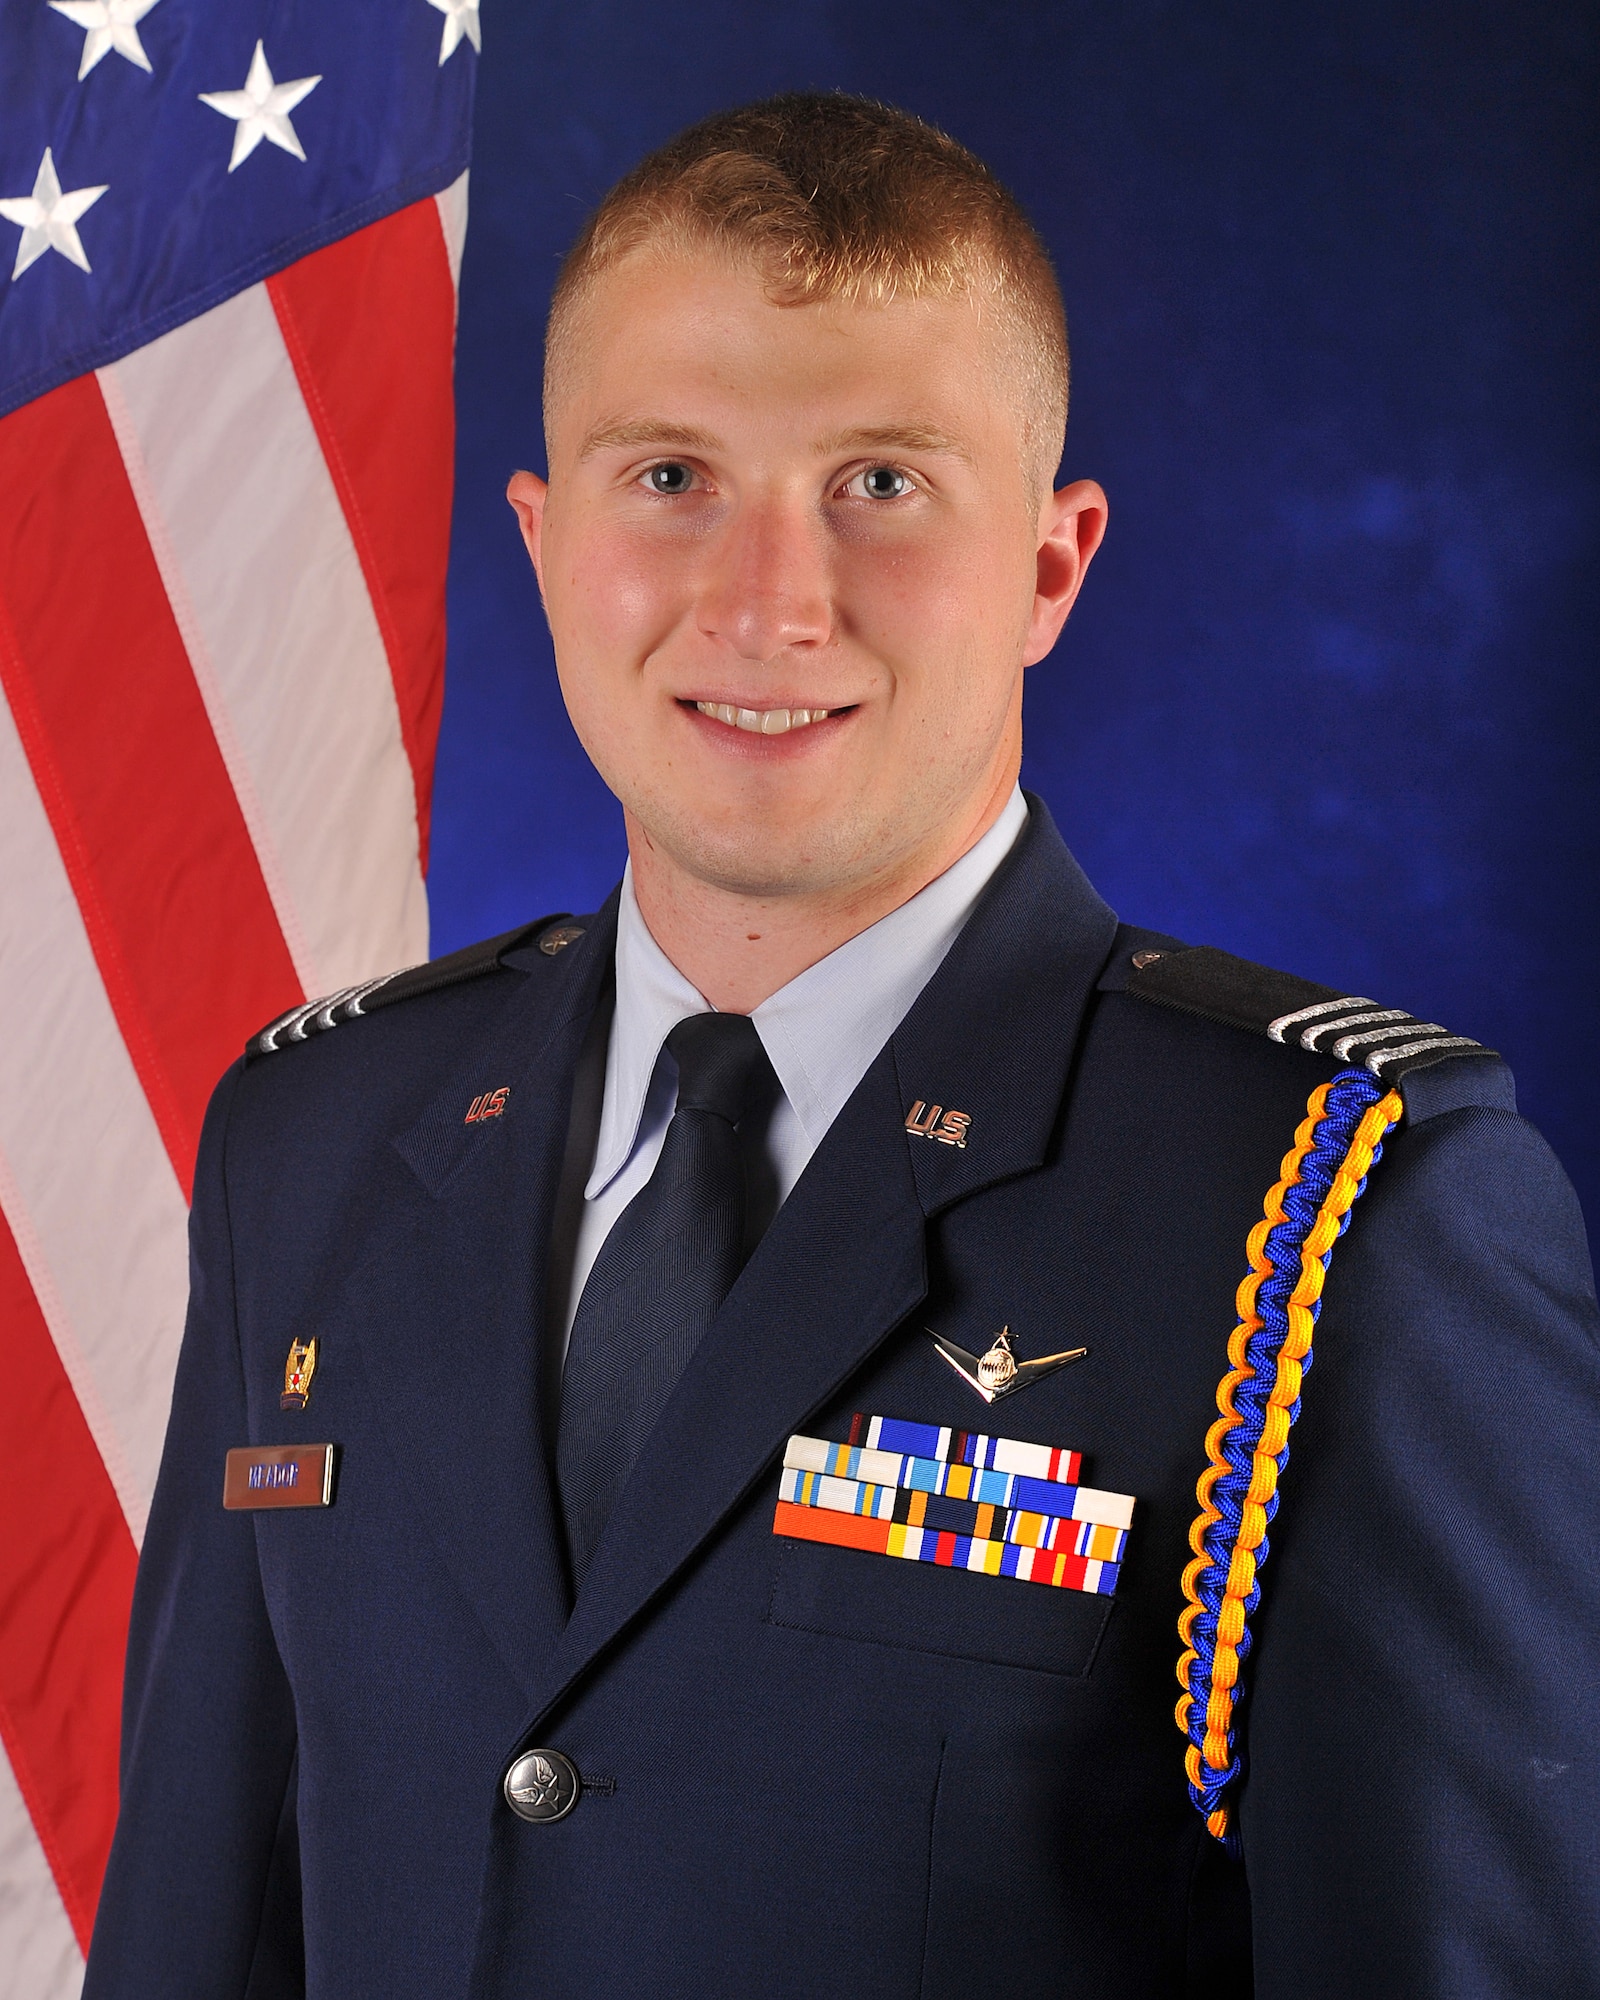 Cadet Dylan J. Meador, a member of Angelo State University's Air Force ROTC Detachment 847, was named by the Air Force Association as the Outstanding ROTC Cadet of the Year for 2014. (Courtesy photo)